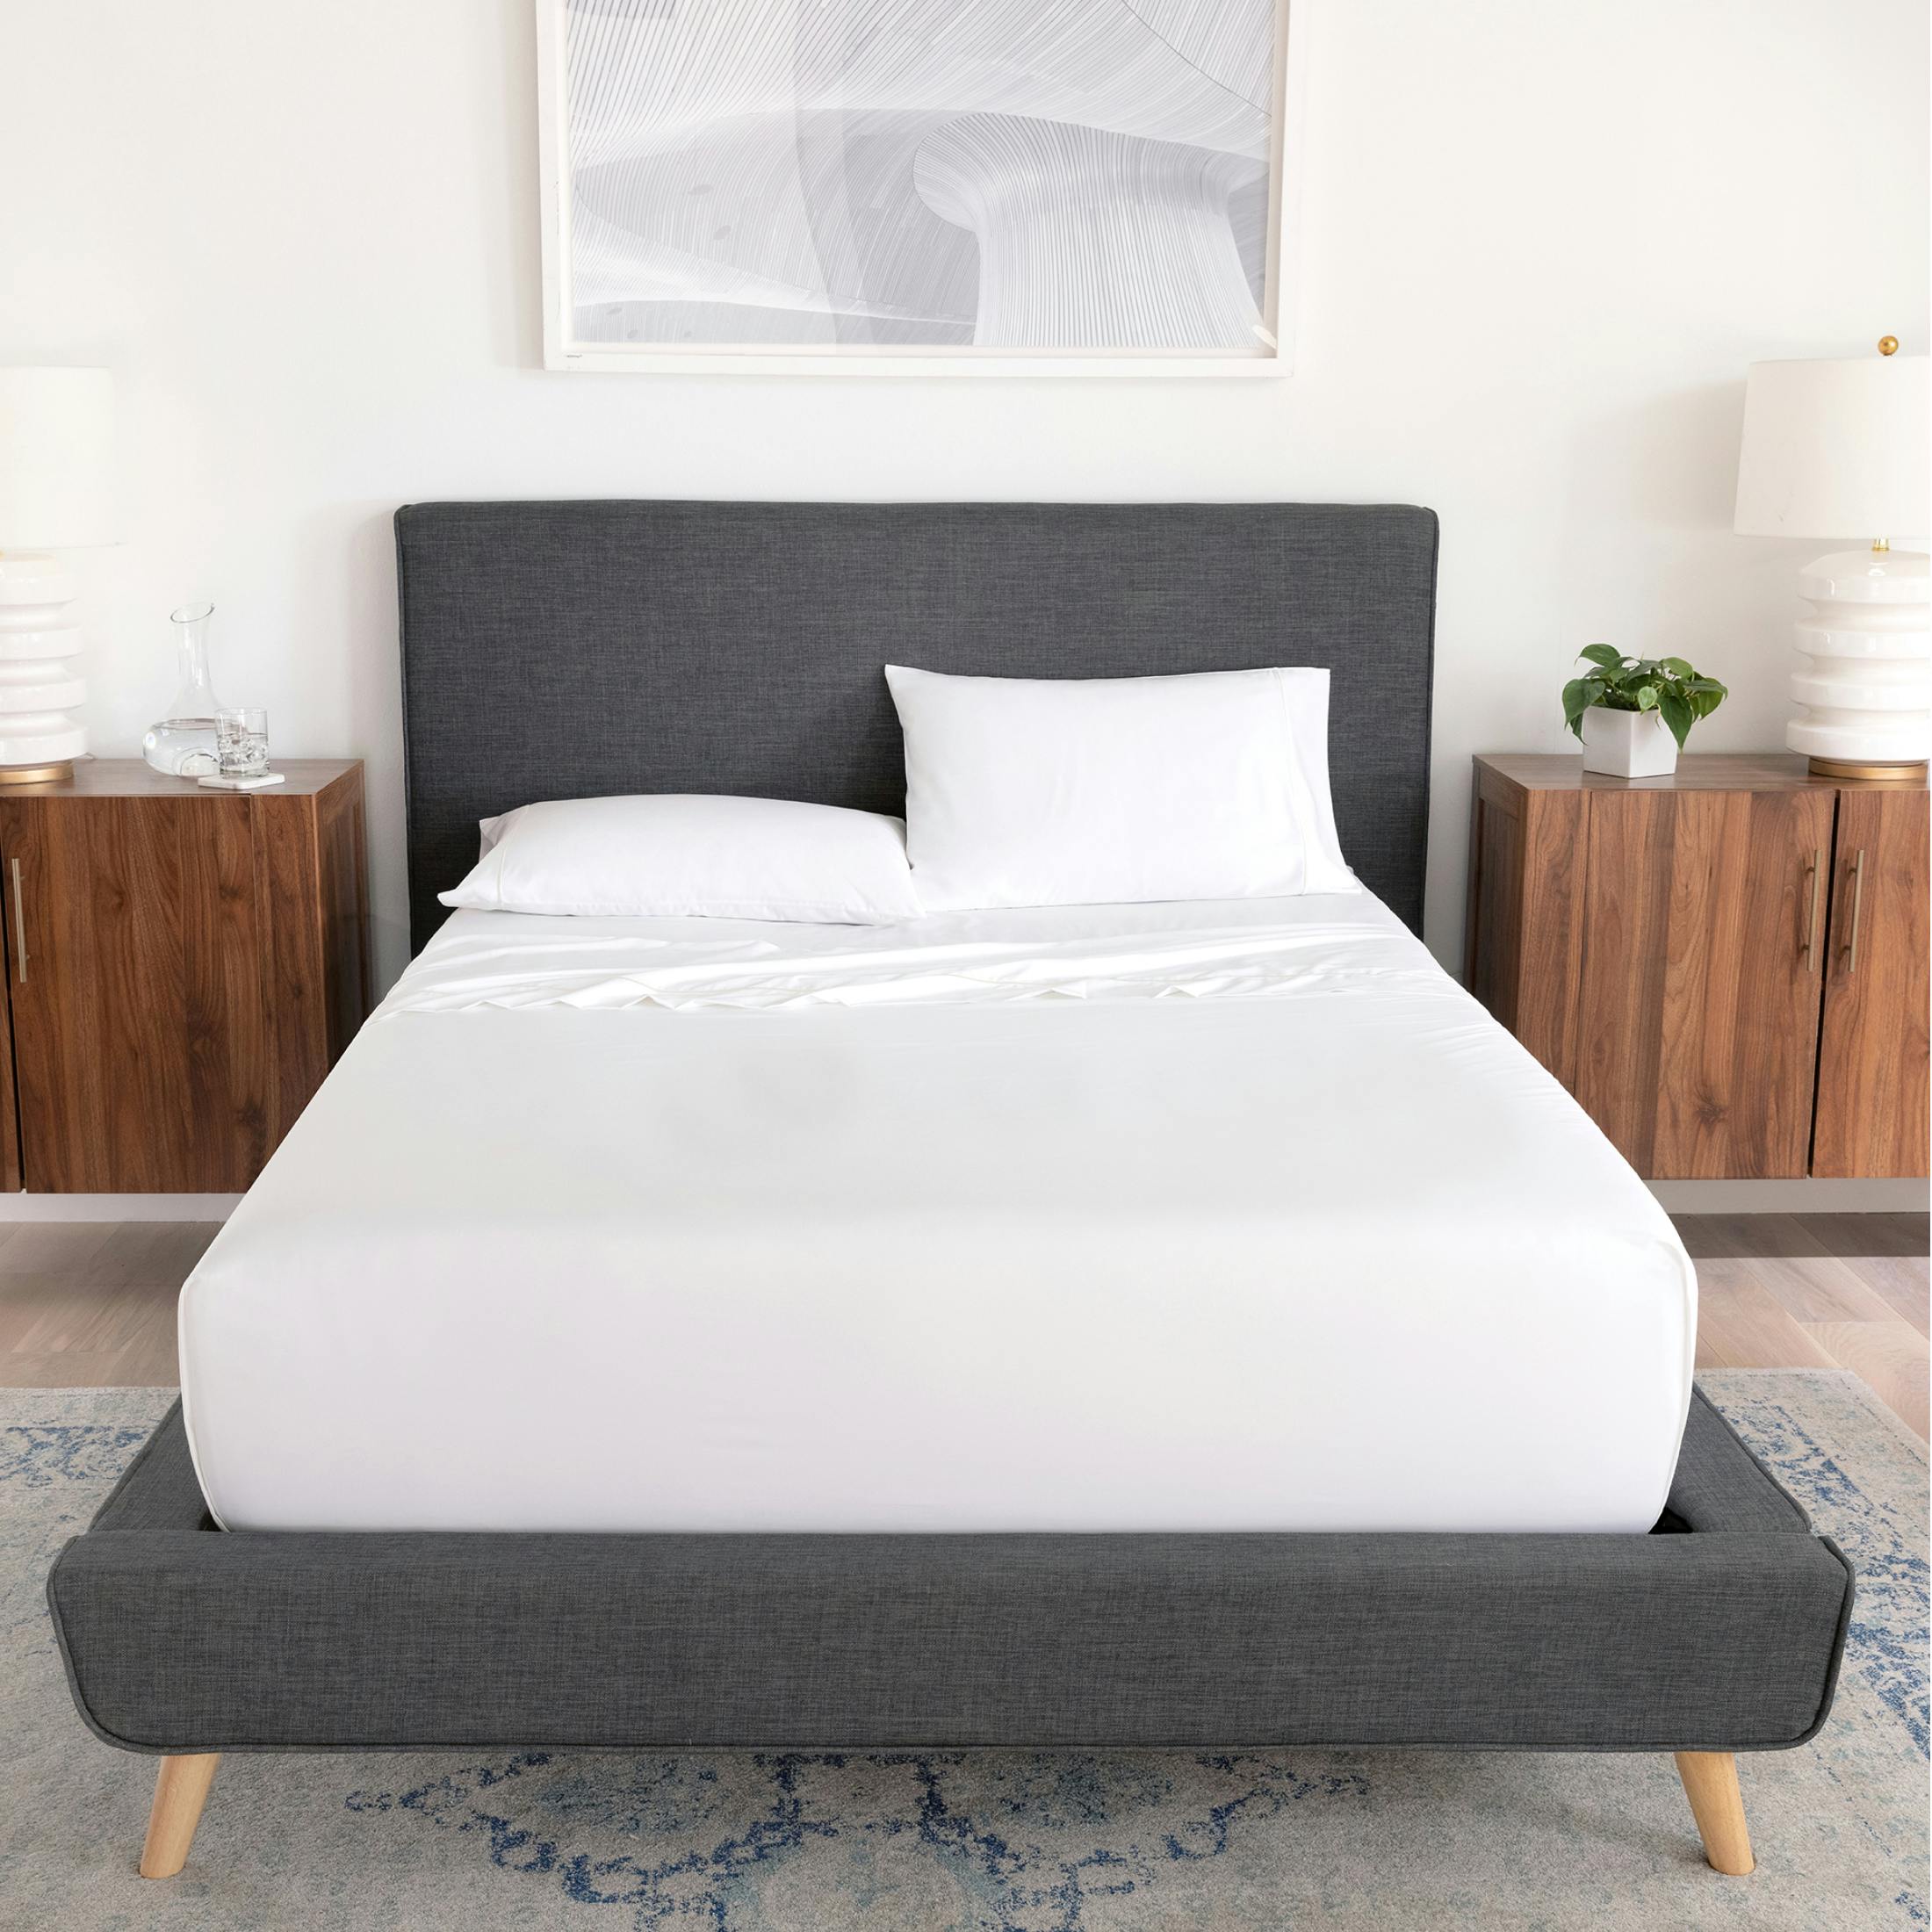 Best Cooling Sheets for Hot Sleepers: Serta Arctic Cooling Sheet Set